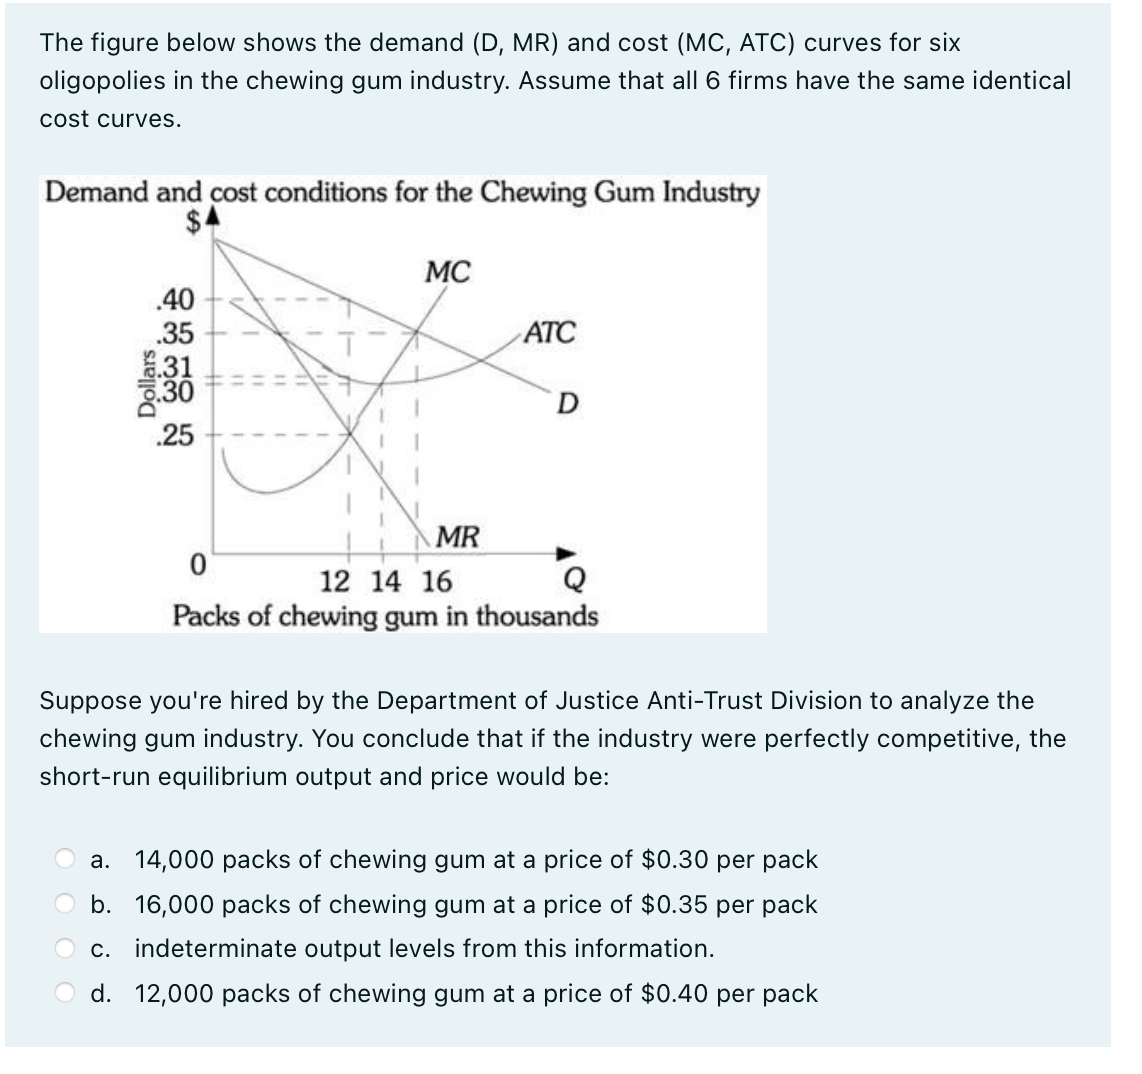 The figure below shows the demand (D, MR) and cost (MC, ATC) curves for six
oligopolies in the chewing gum industry. Assume that all 6 firms have the same identical
cost curves.
Demand and cost conditions for the Chewing Gum Industry
.40
.35
.31
8.30
.25
Dollars
MC
MR
ATC
D
0
12 14 16
Packs of chewing gum in thousands
Suppose you're hired by the Department of Justice Anti-Trust Division to analyze the
chewing gum industry. You conclude that if the industry were perfectly competitive, the
short-run equilibrium output and price would be:
a. 14,000 packs of chewing gum at a price of $0.30 per pack
b. 16,000 packs of chewing gum at a price of $0.35 per pack
C. indeterminate output levels from this information.
d. 12,000 packs of chewing gum at a price of $0.40 per pack